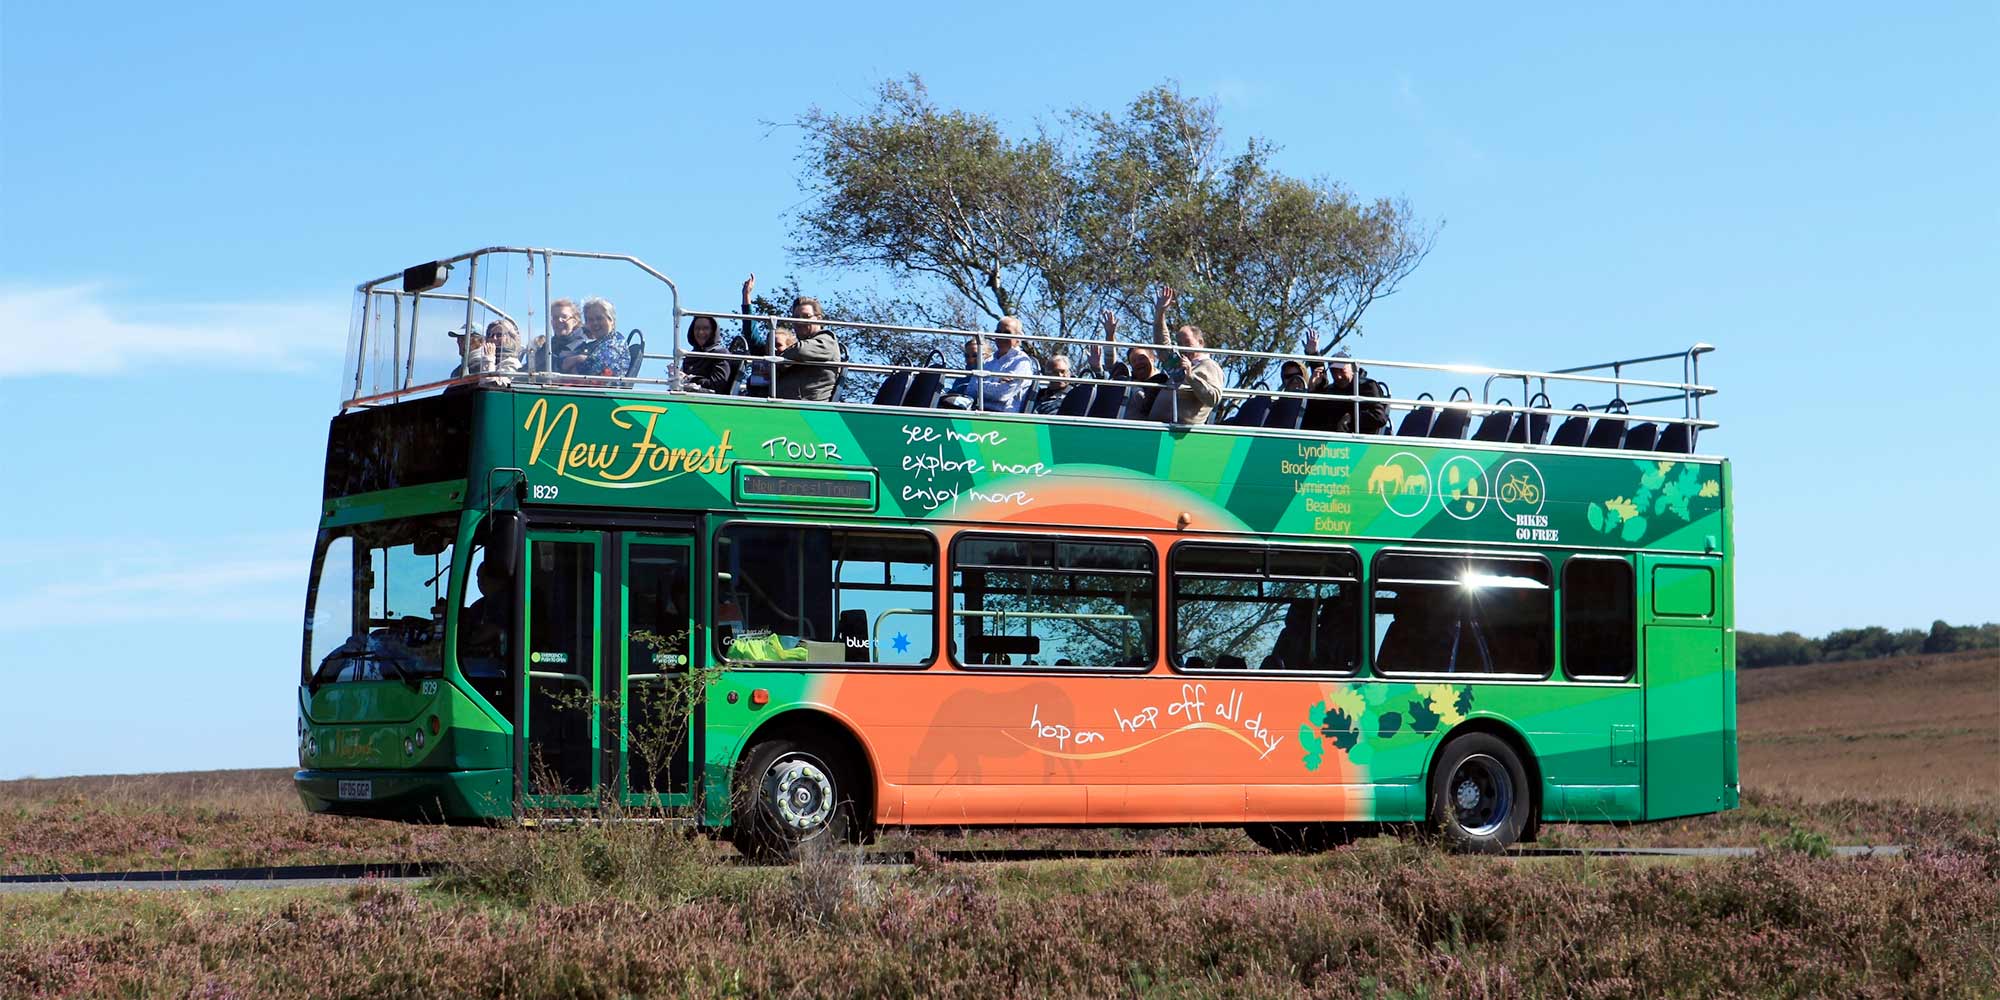 Open bus with visitors enjoying a view across open moorland